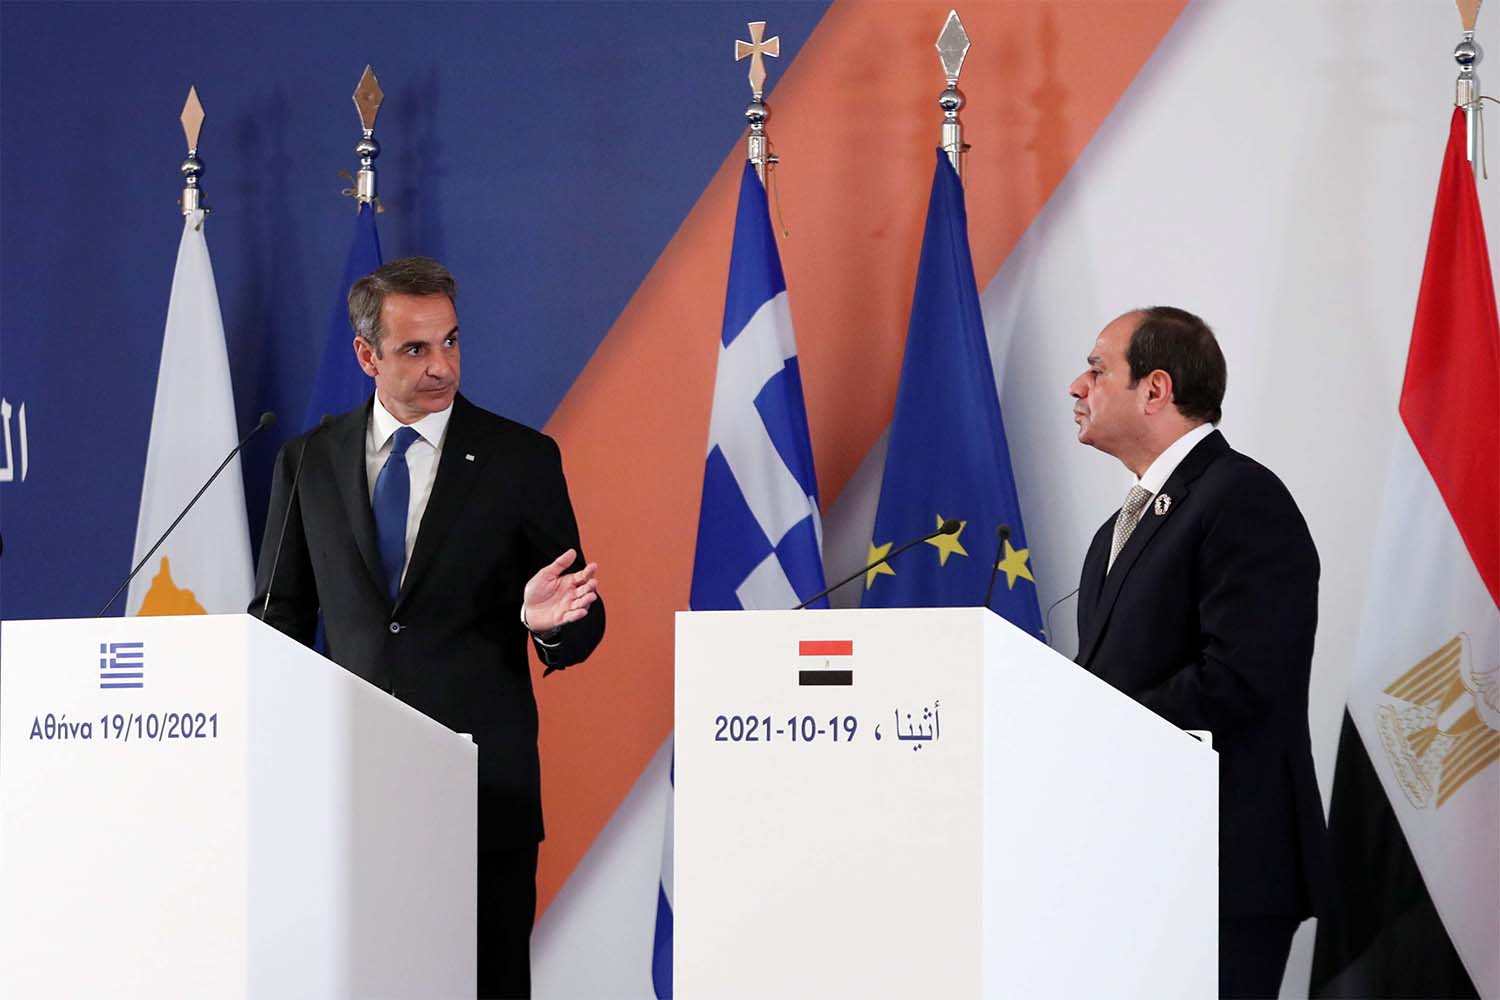 Greece is seeking to expand energy cooperation across the Mediterranean with Egypt and Israel